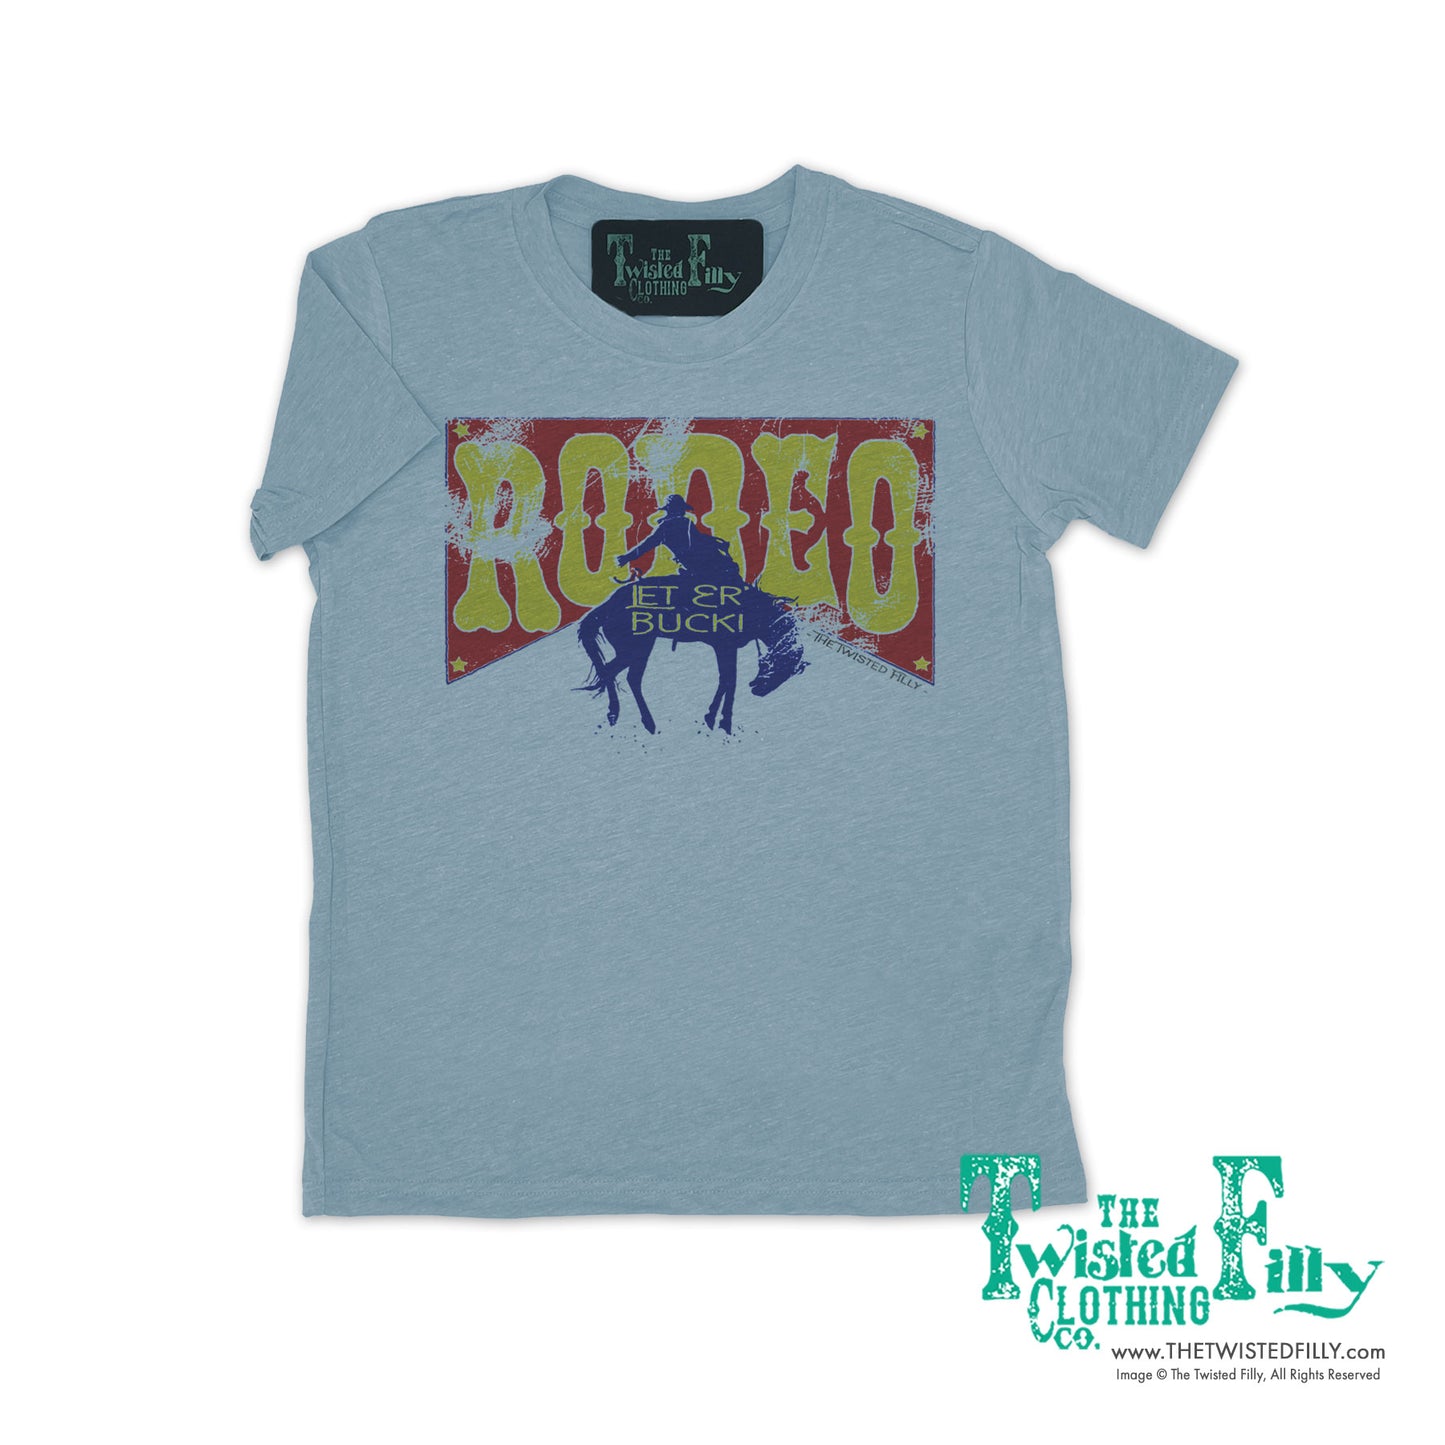 Rodeo - S/S Youth Tee - Assorted Colors